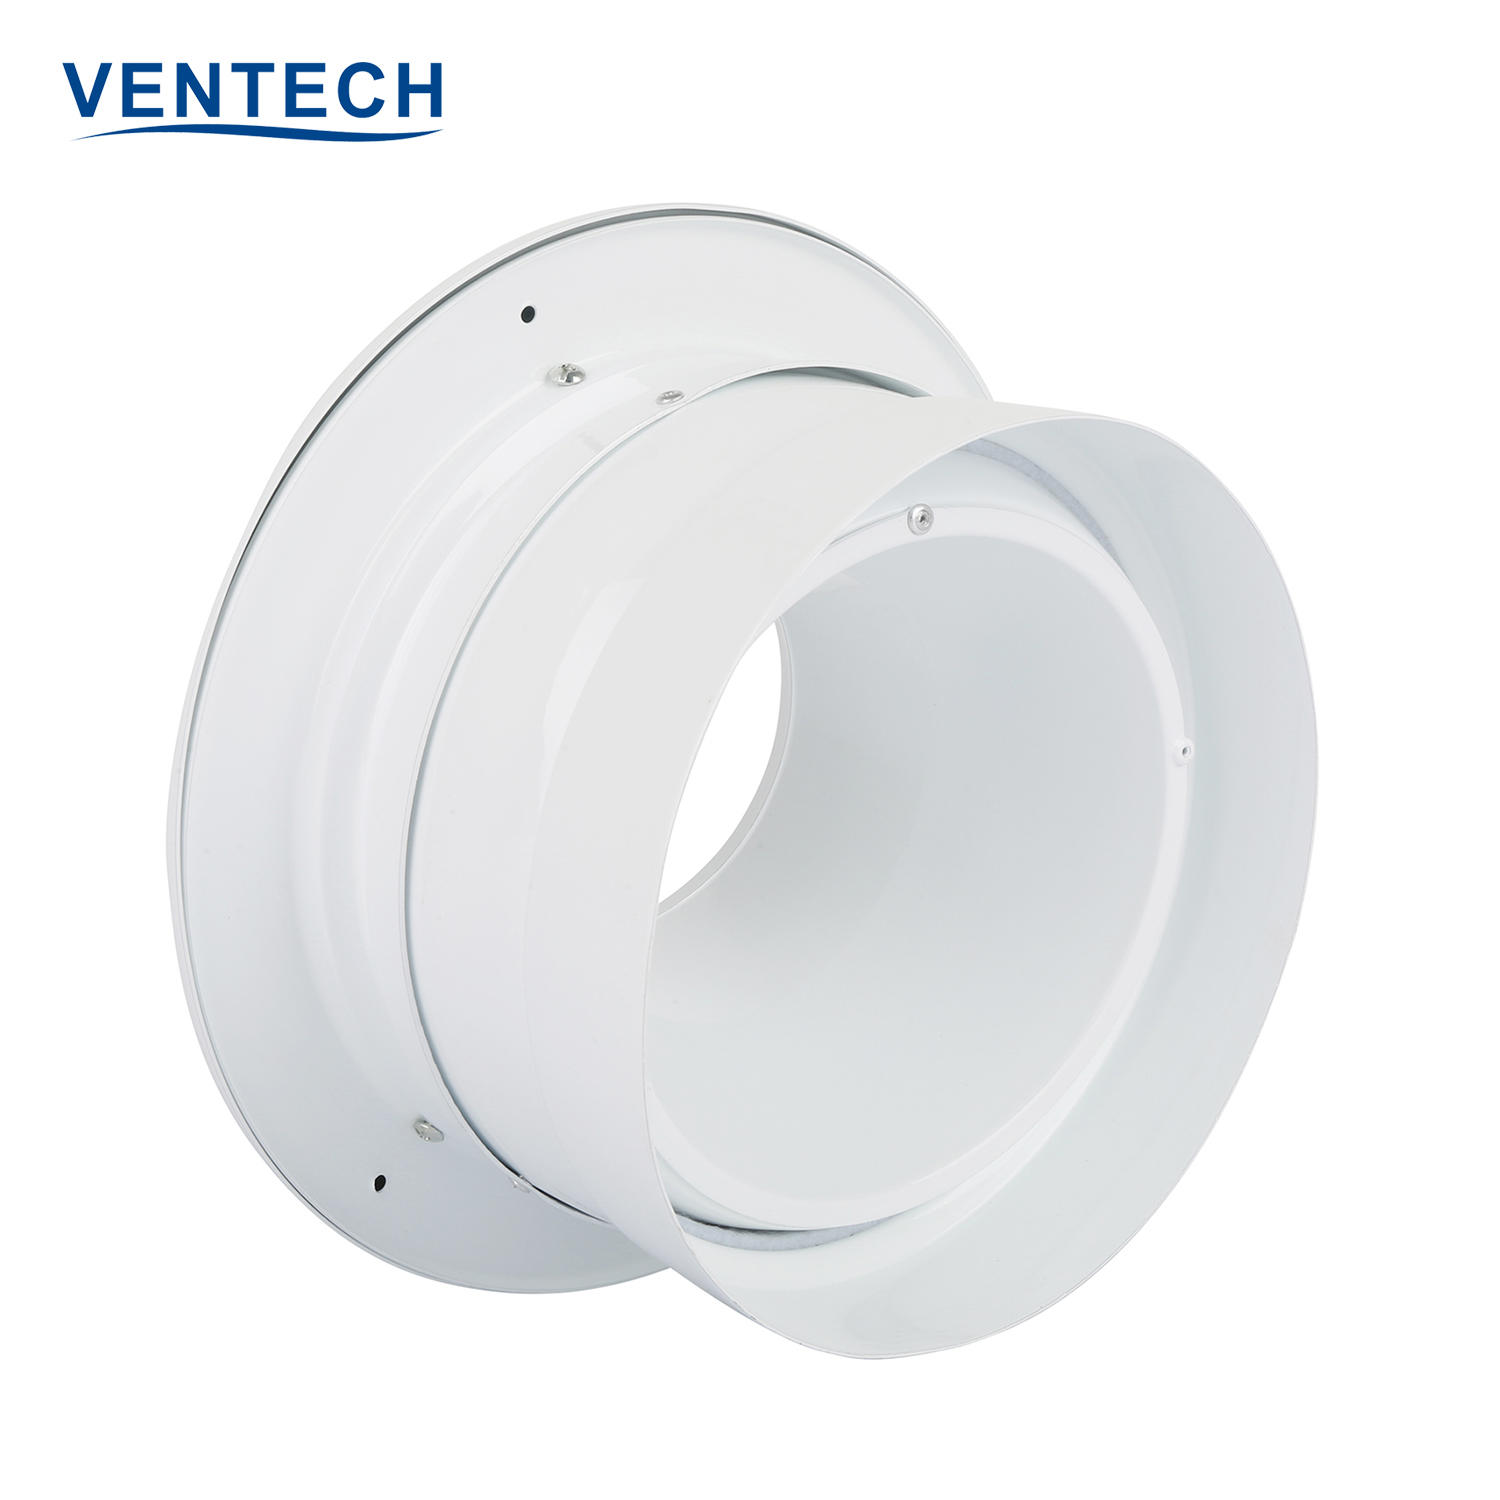 Hvac High Quality Air Conditioning Ventilation Round Exhaust Supply Ceilling Air Duct Ceiling Ball Spout Jet Nozzle Diffusers